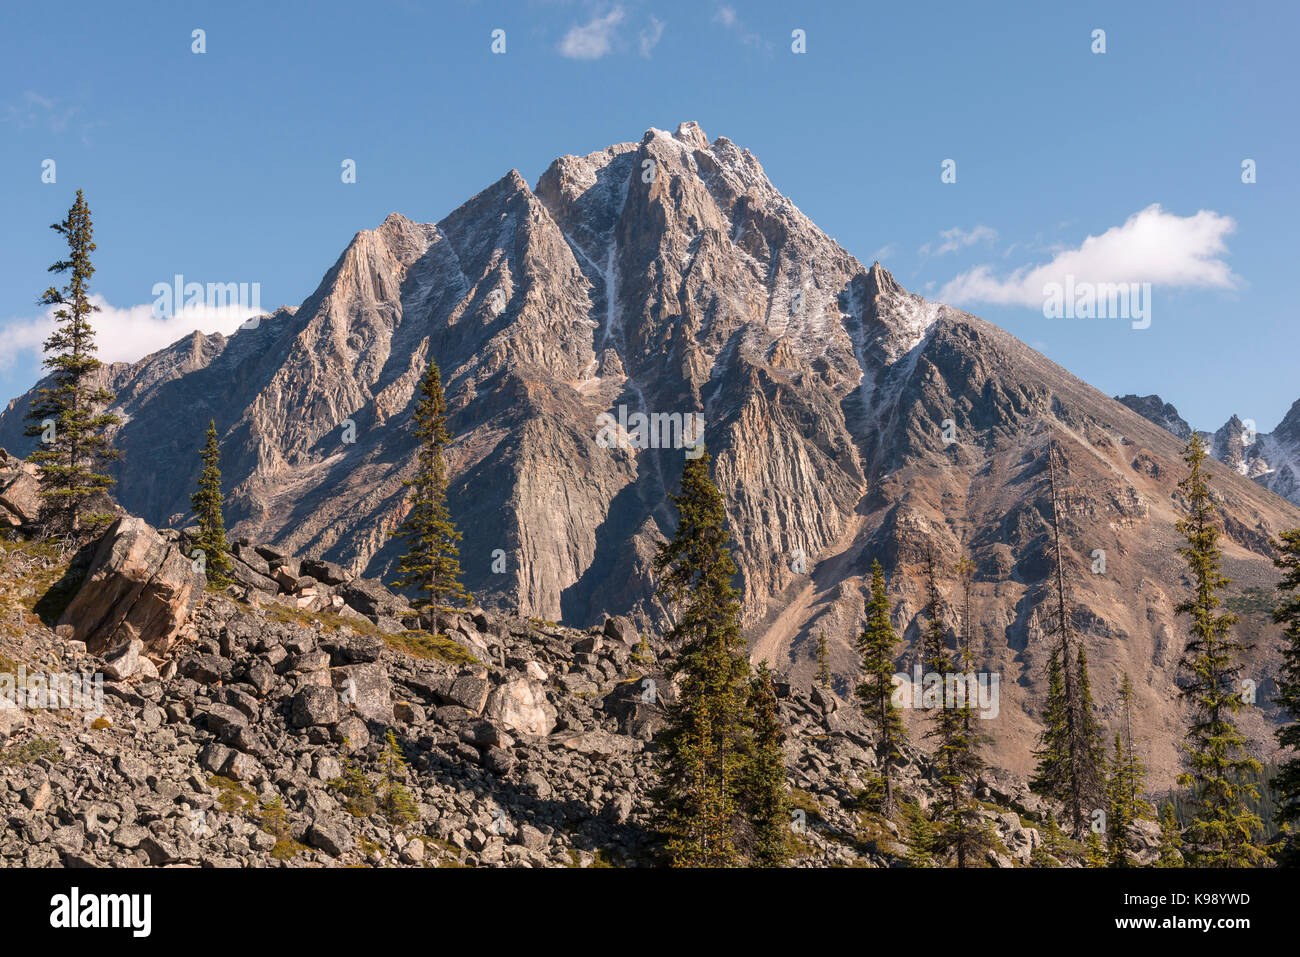 Throne  mountain seen from the Tonquin Valley Trail in Jasper National Park. Stock Photo